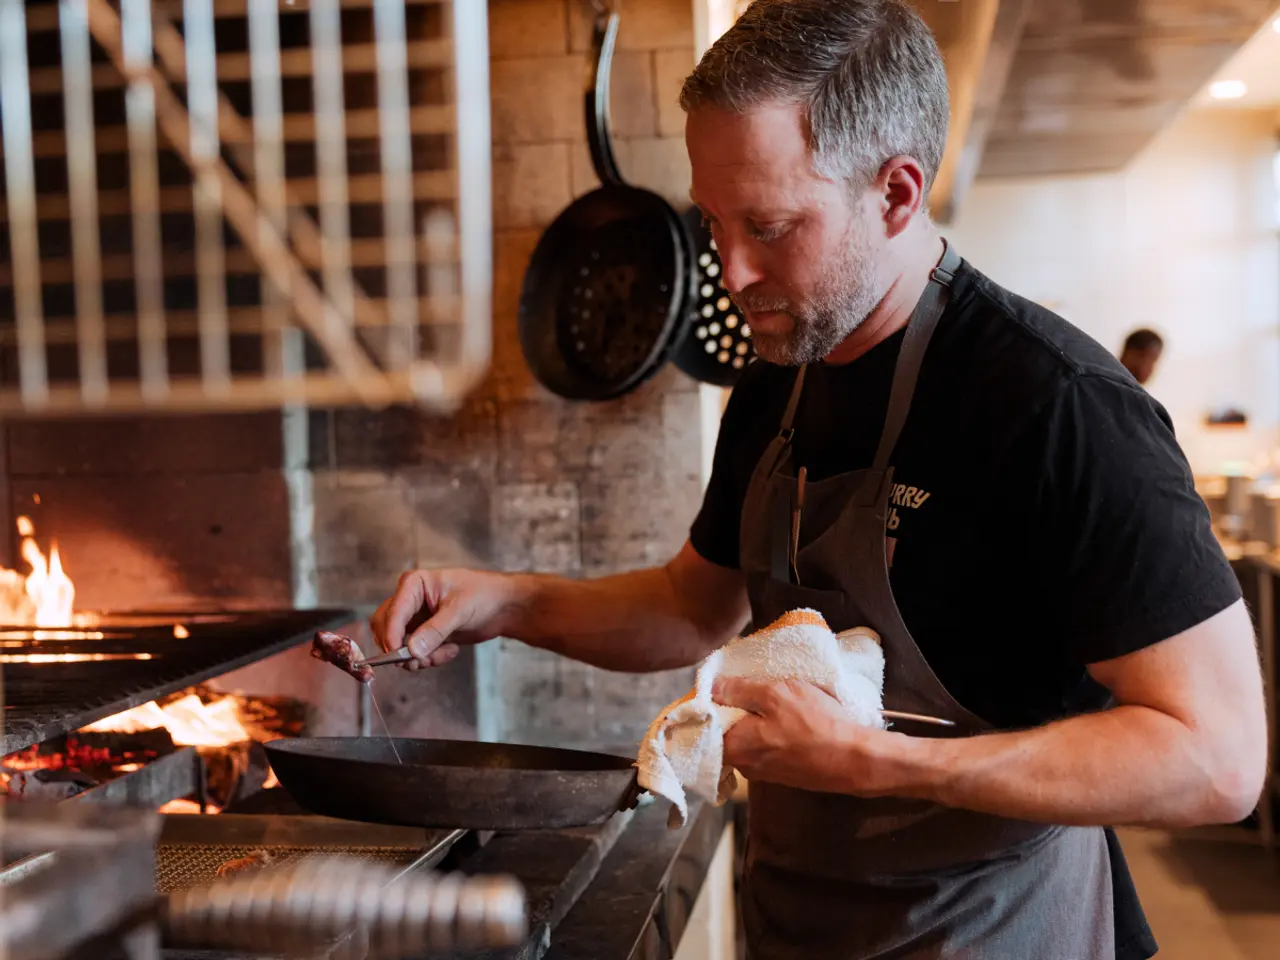 A focused chef attentively grills food over an open flame in a professional kitchen.